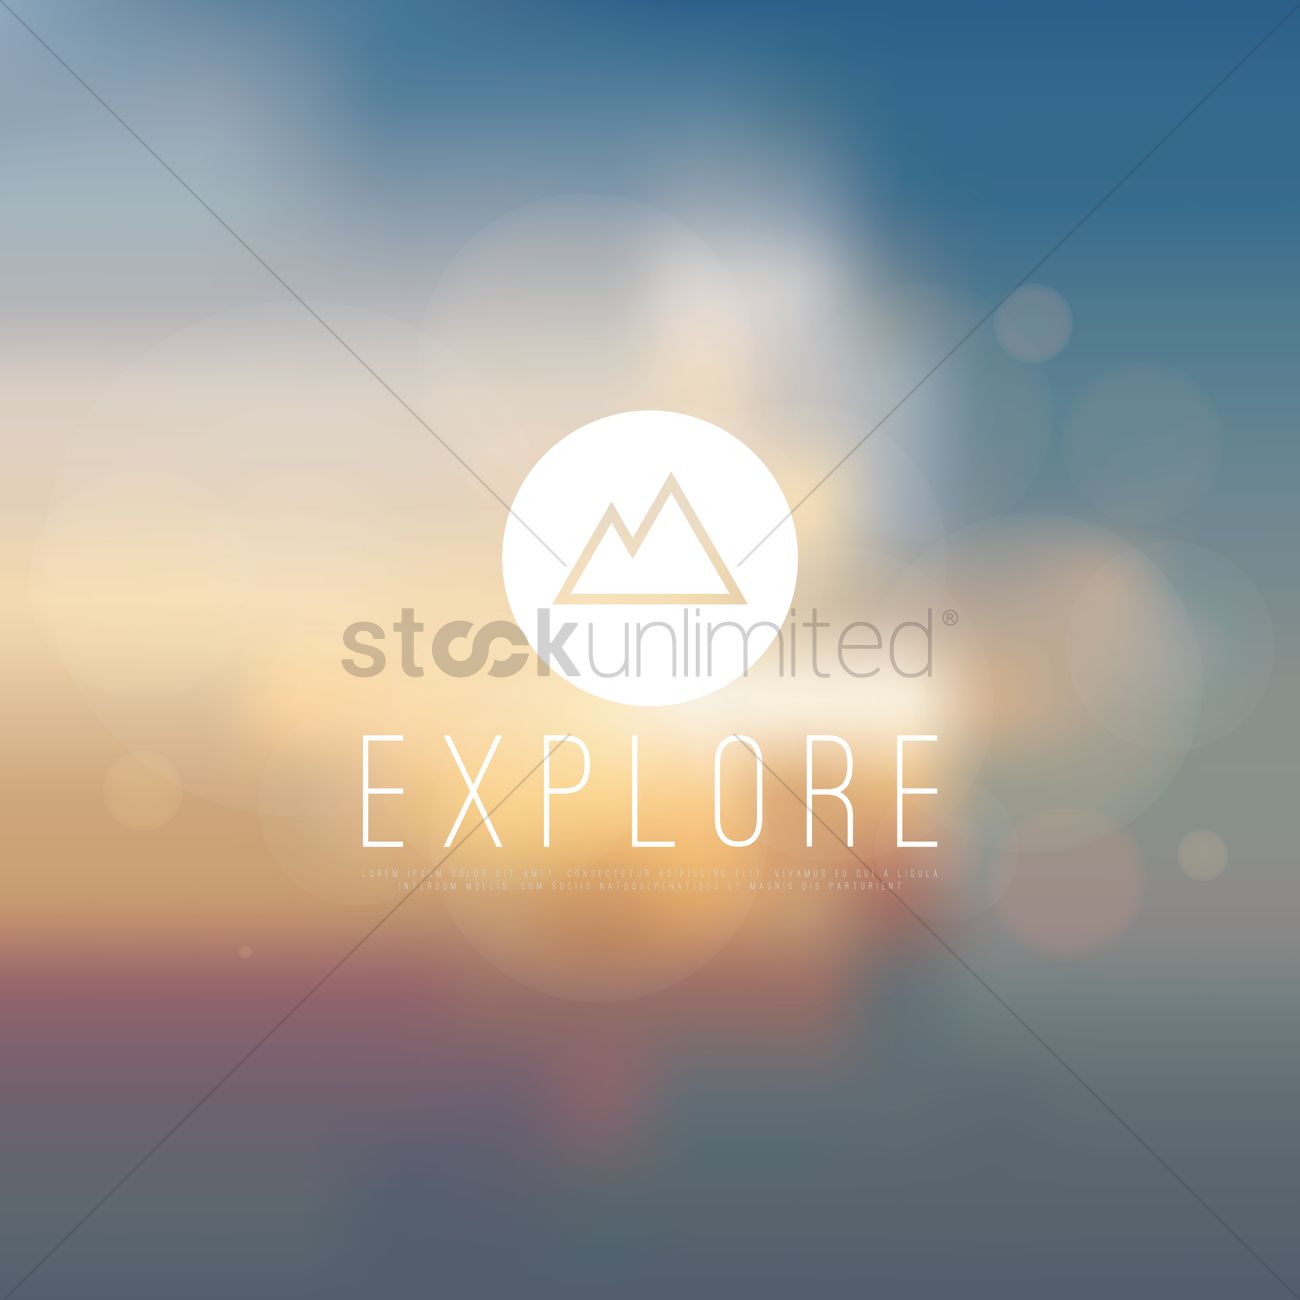 Explore Background Concept Vector Image Stockunlimited